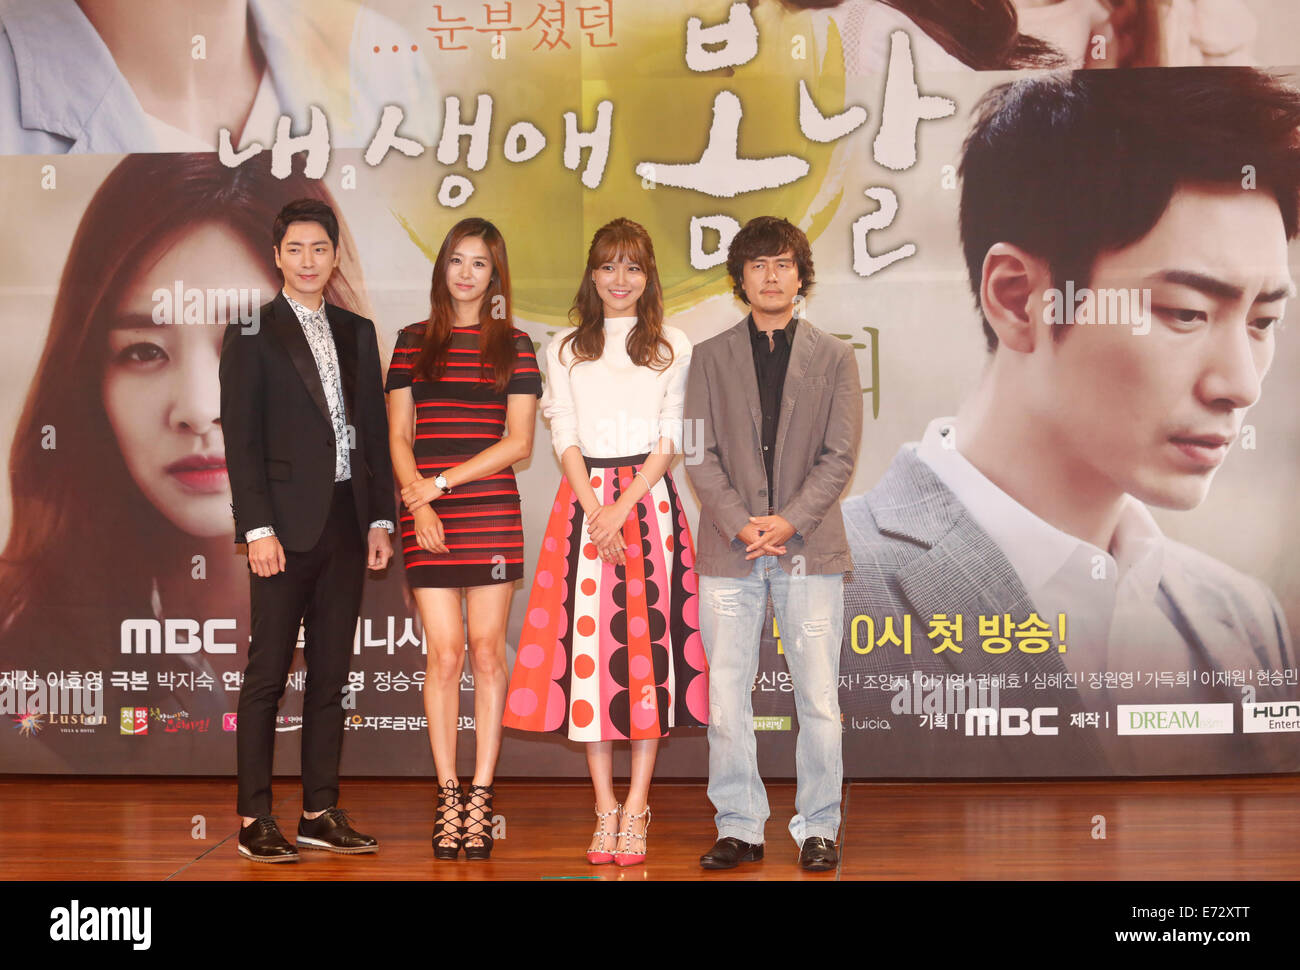 Lee Jun-Hyuk, Jang Shin-Young, Soo-Young(Girls' Generation) and Kam Woo-Sung, Sep 04, 2014 : South Korean actors and actresses (L-R) Lee Jun-hyuk, Jang Shin-young, Sooyoung and Kam Woo-sung pose during a press conference for their new drama 'My Spring Days' in Seoul, South Korea. © Lee Jae-Won/AFLO/Alamy Live News Stock Photo